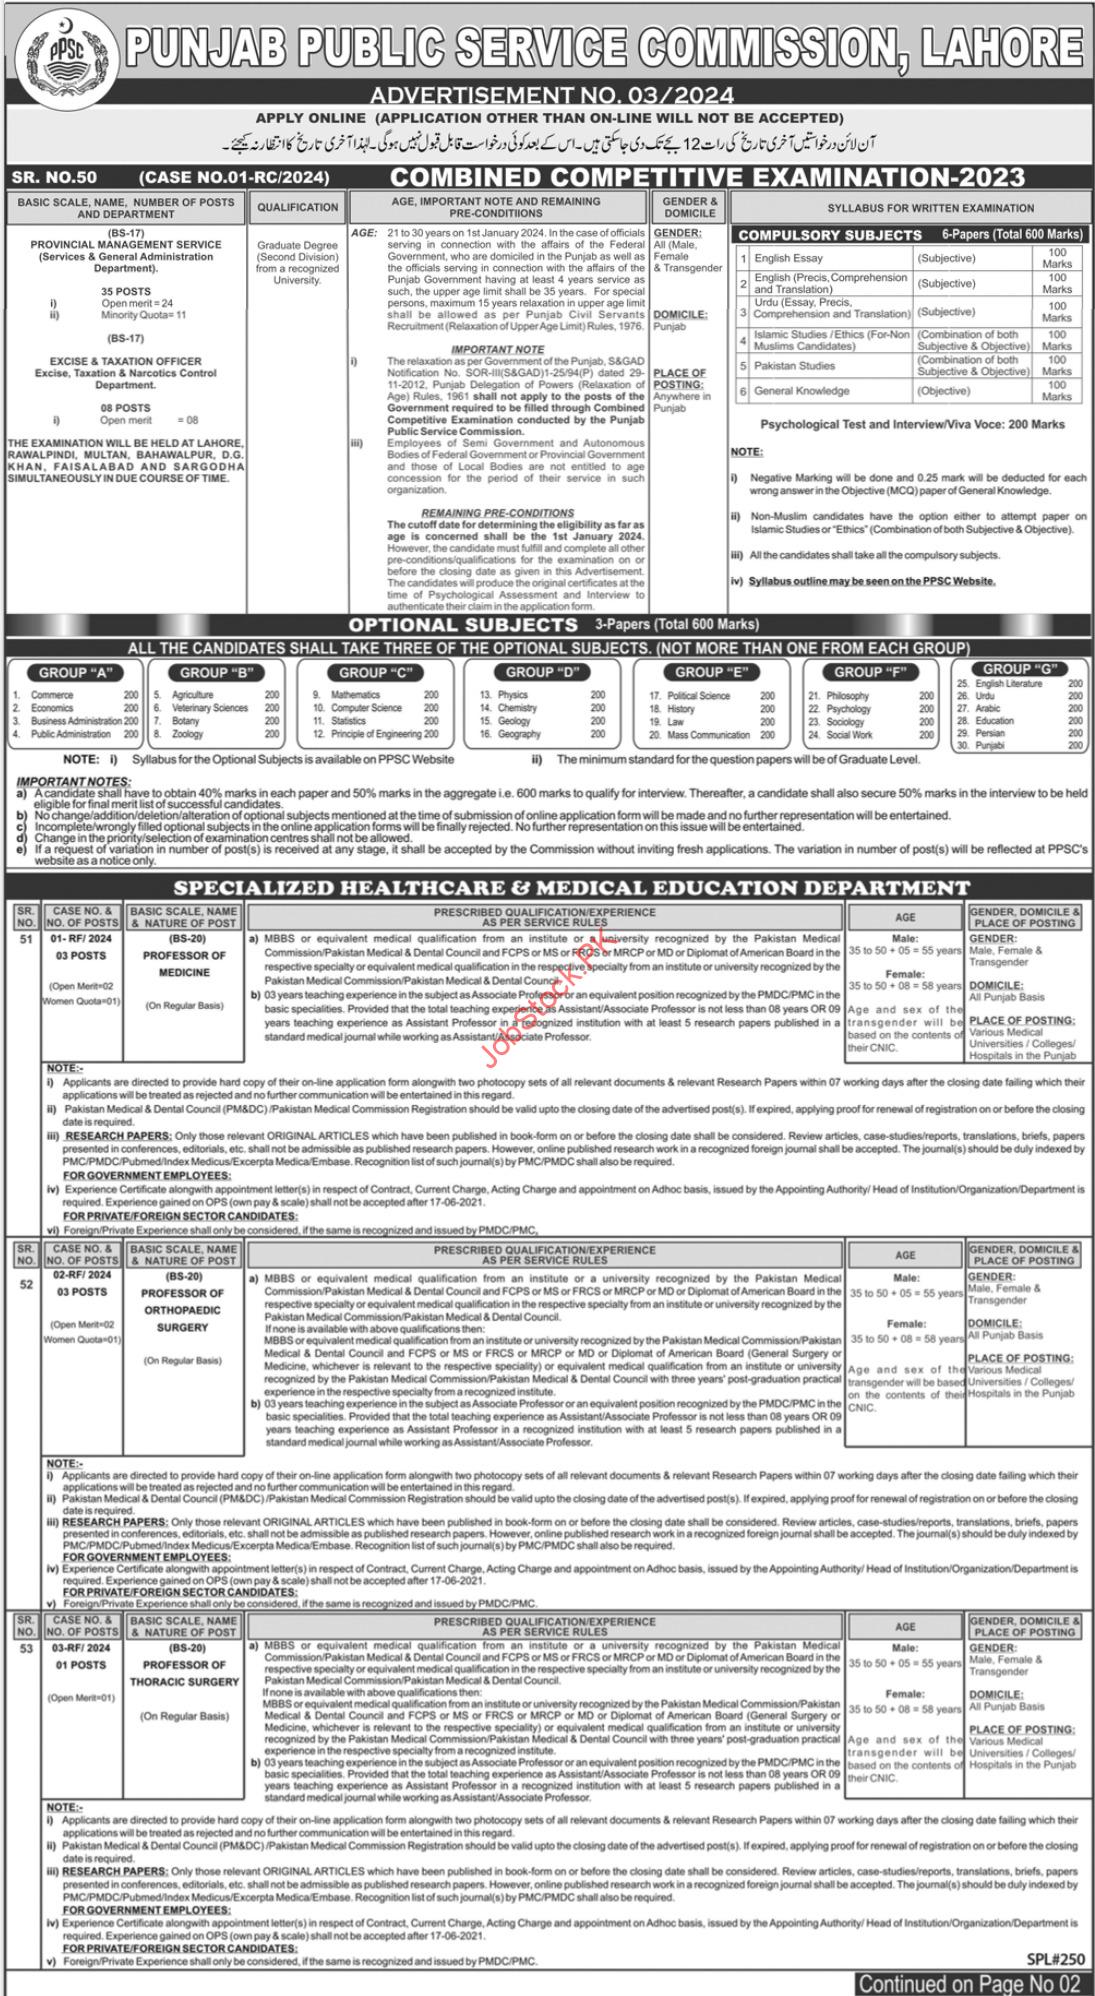 Advertisement No 3 for jobs at PPSC